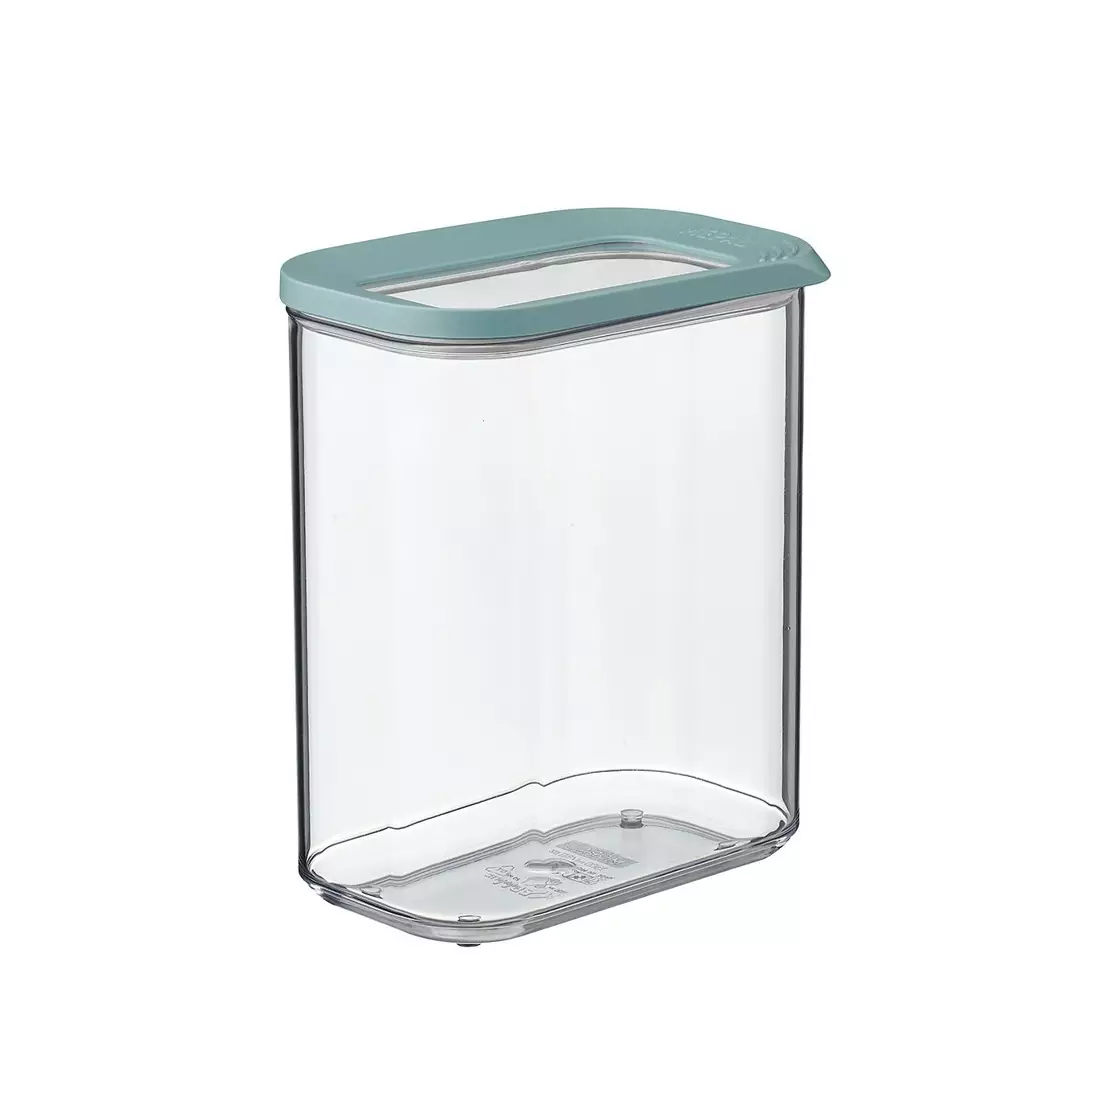 Mepal Modula food container 1500ml, Nordic Green